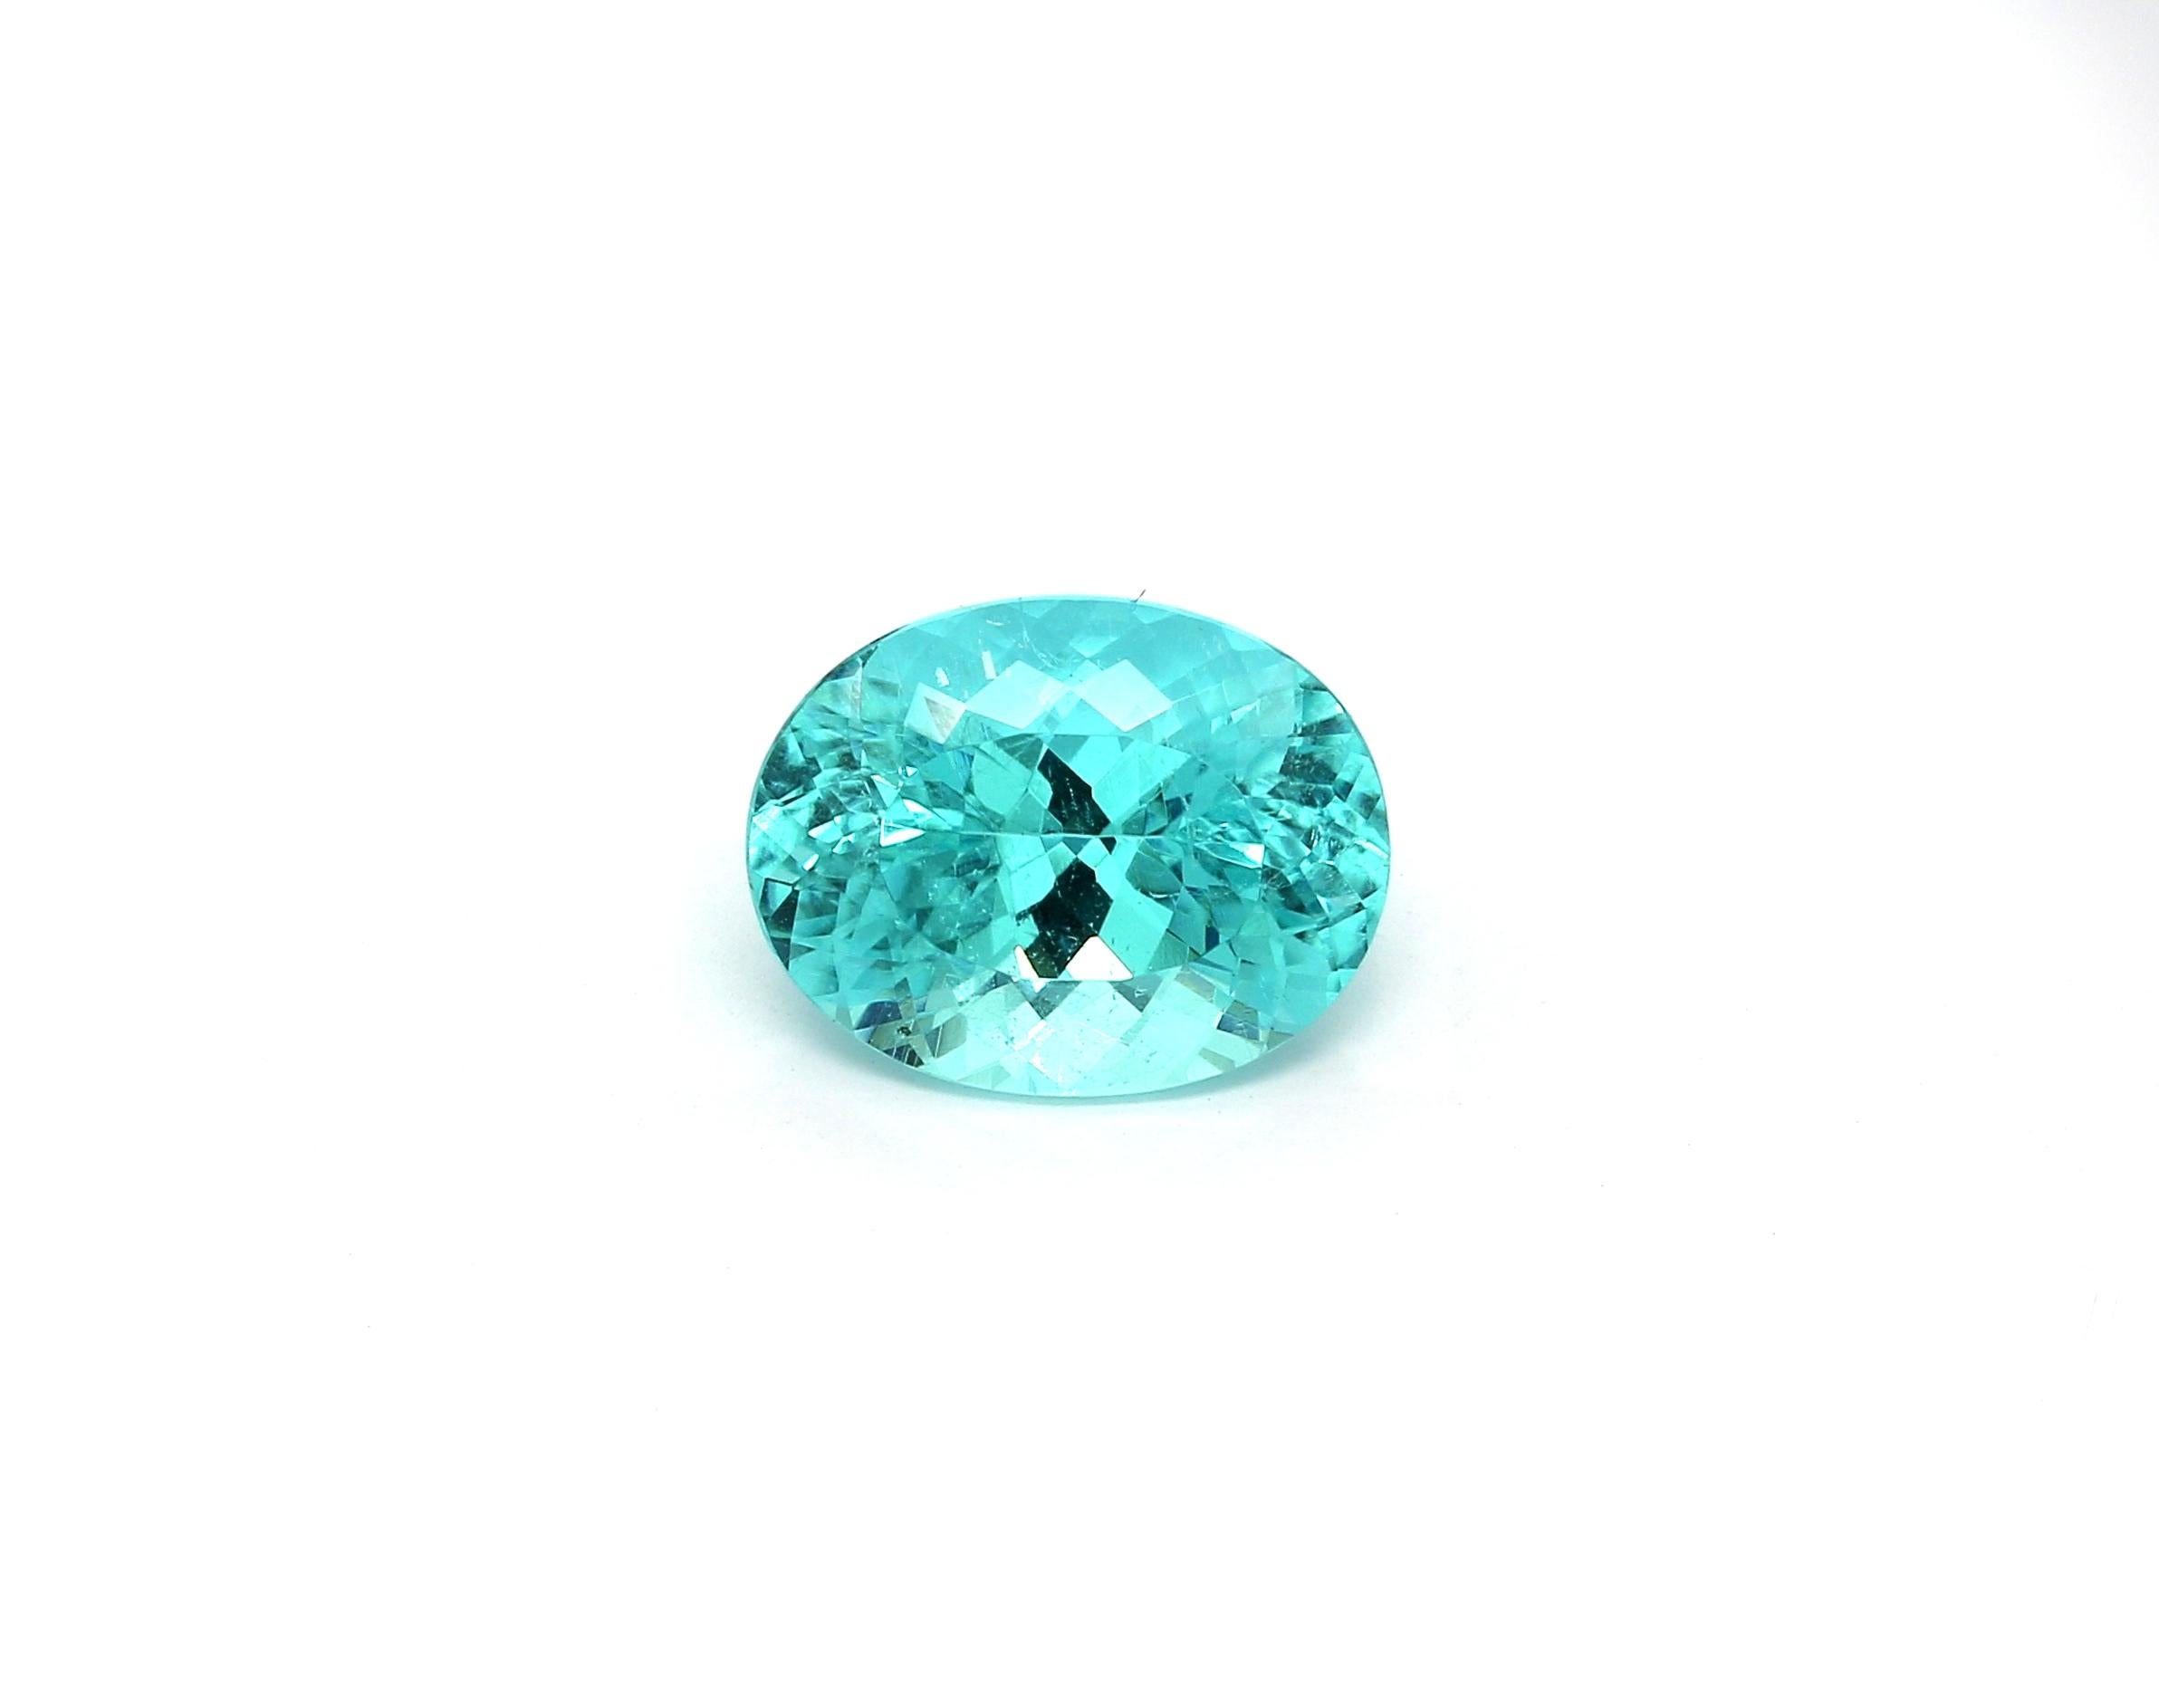 This oval-shaped Paraiba tourmaline was founded in Mozambique and has an exceptional Windex blue-green color! This Paraiba has an excellent saturation and exceptional clarity, along with its well-proportioned and brilliant display, makes it a